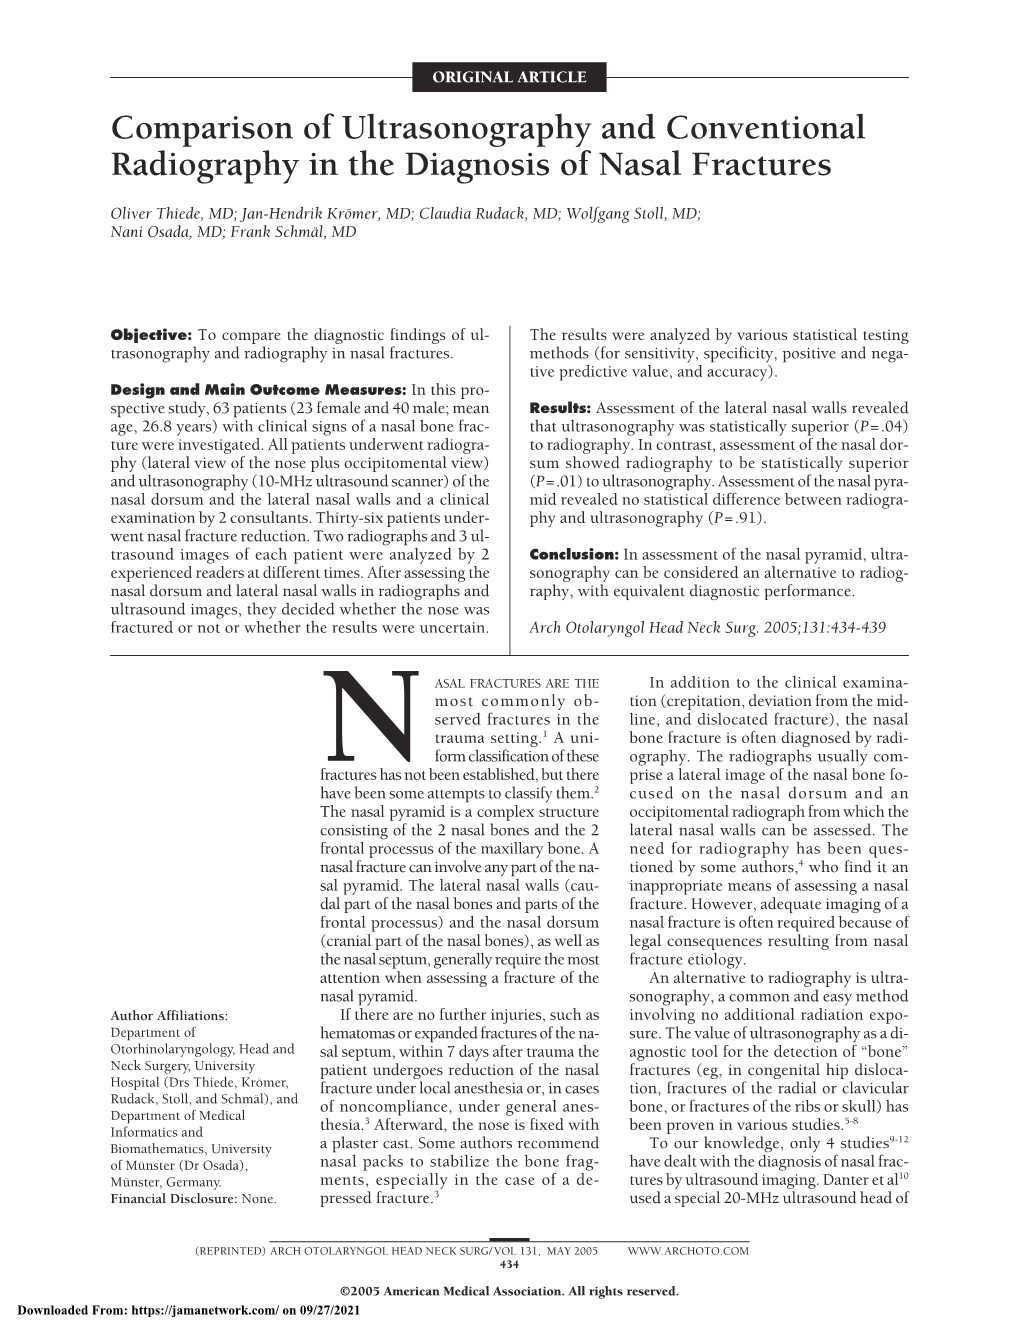 Comparison of Ultrasonography and Conventional Radiography in the Diagnosis of Nasal Fractures